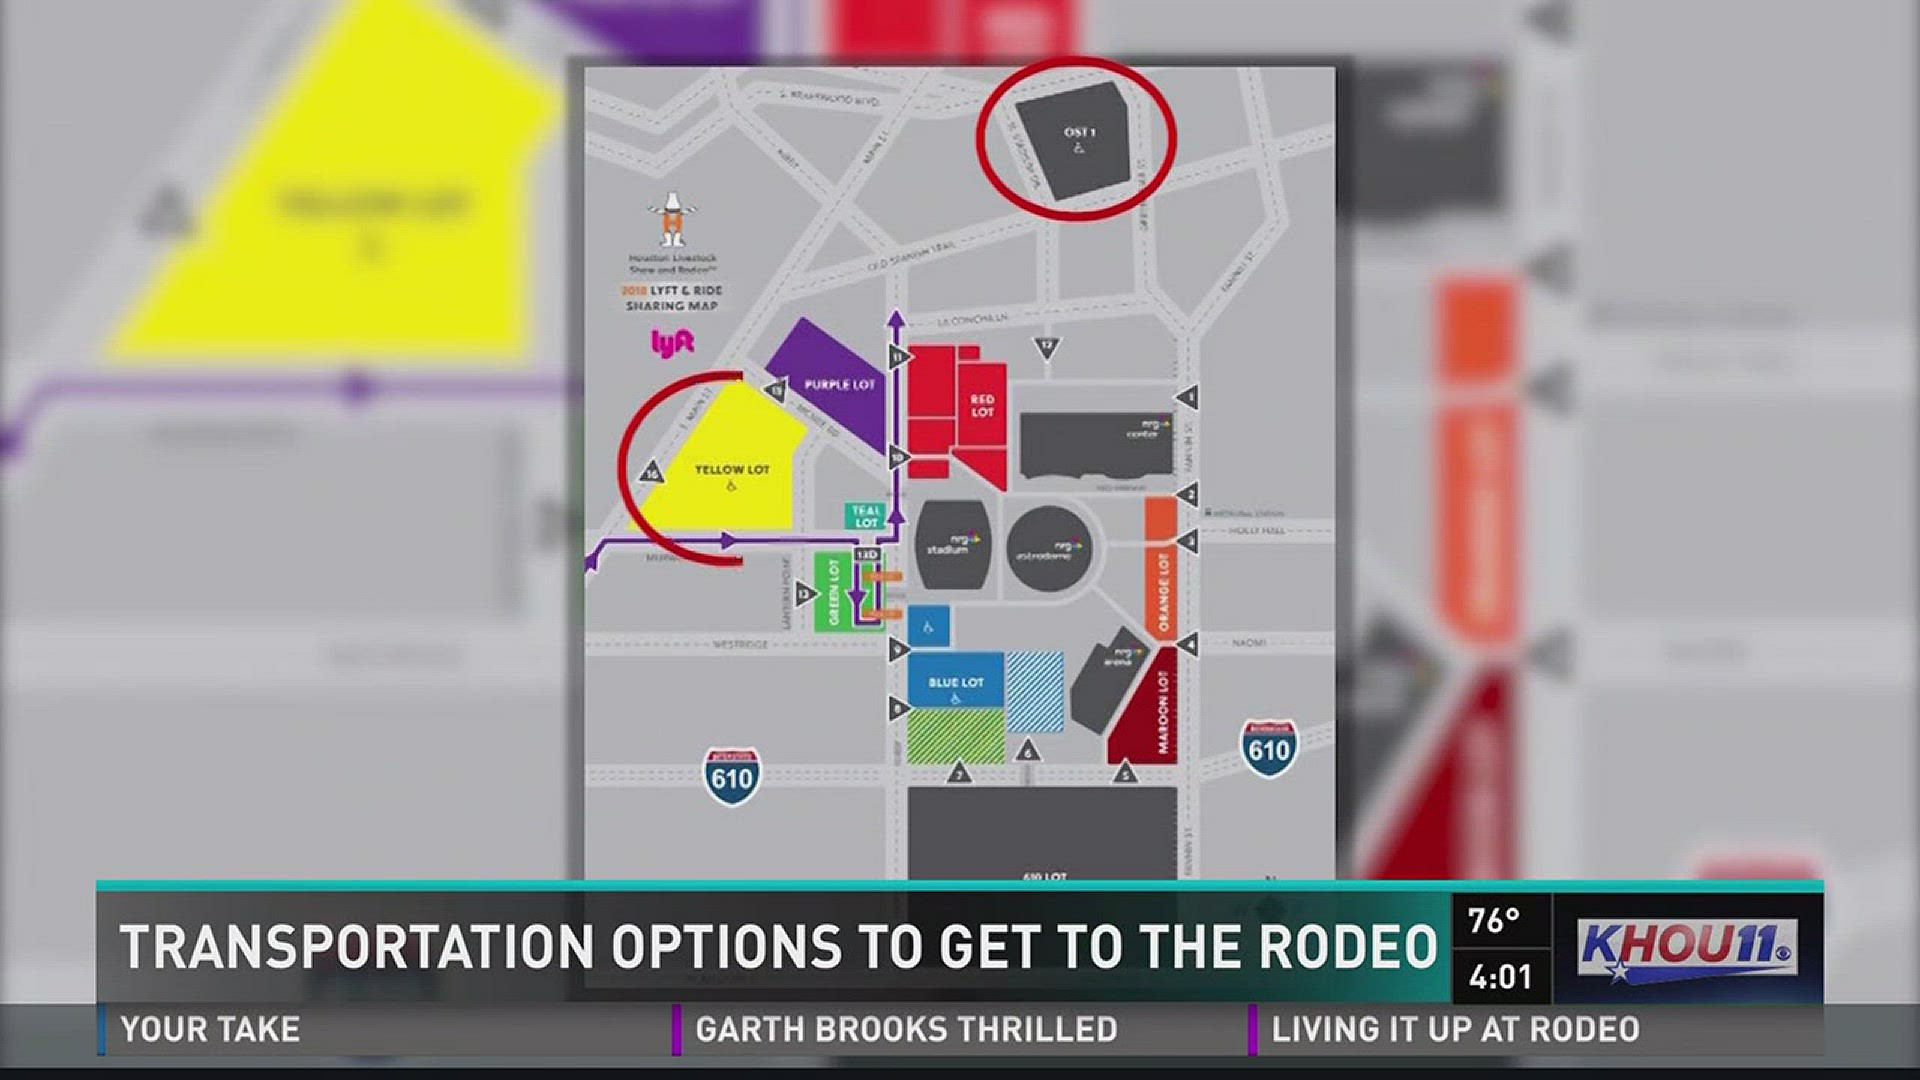 There are several options for getting to and from RodeoHouston this year.